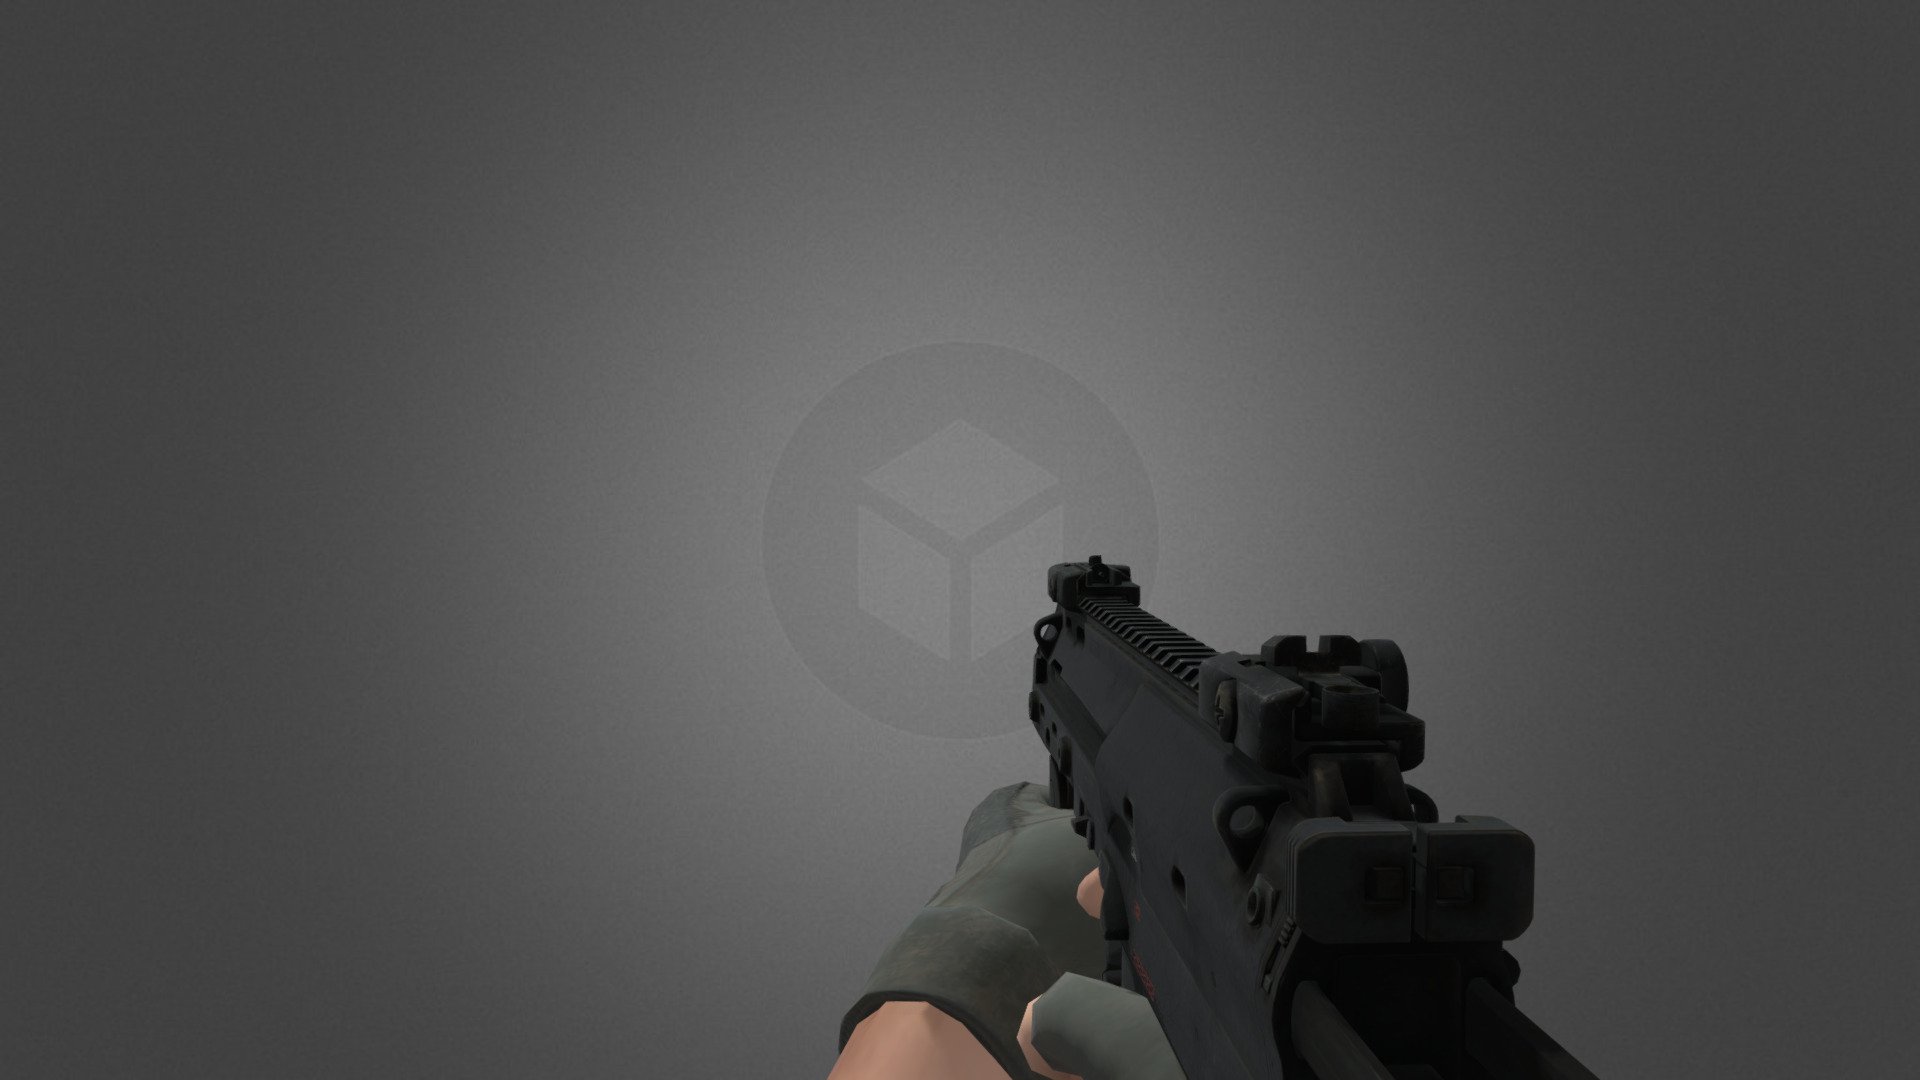 See also other models    : https://sketchfab.com/barcodegames/models
Animations:

-Shoot

-Reload

-Draw

-Hide

For Game Engines - MP7 Animated - Buy Royalty Free 3D model by BarcodeGames 3d model